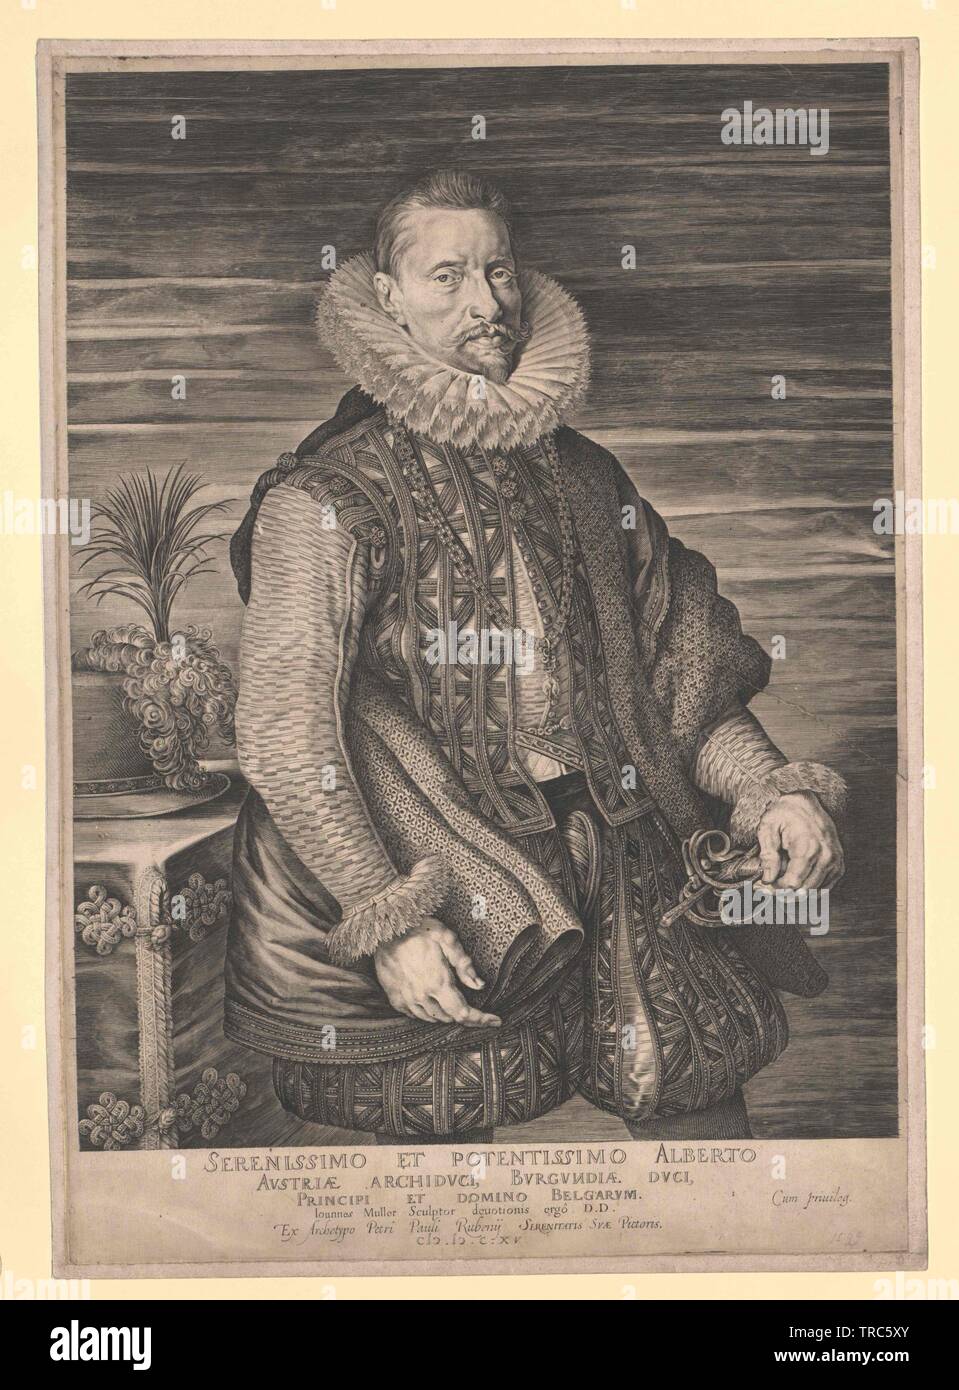 Albrecht VII the pious, Archduke of Austria, cardinal, 1577 archbishop of Toledo and Primas of Spain, renounce 1598, proconsul of the Netherlands, Additional-Rights-Clearance-Info-Not-Available Stock Photo